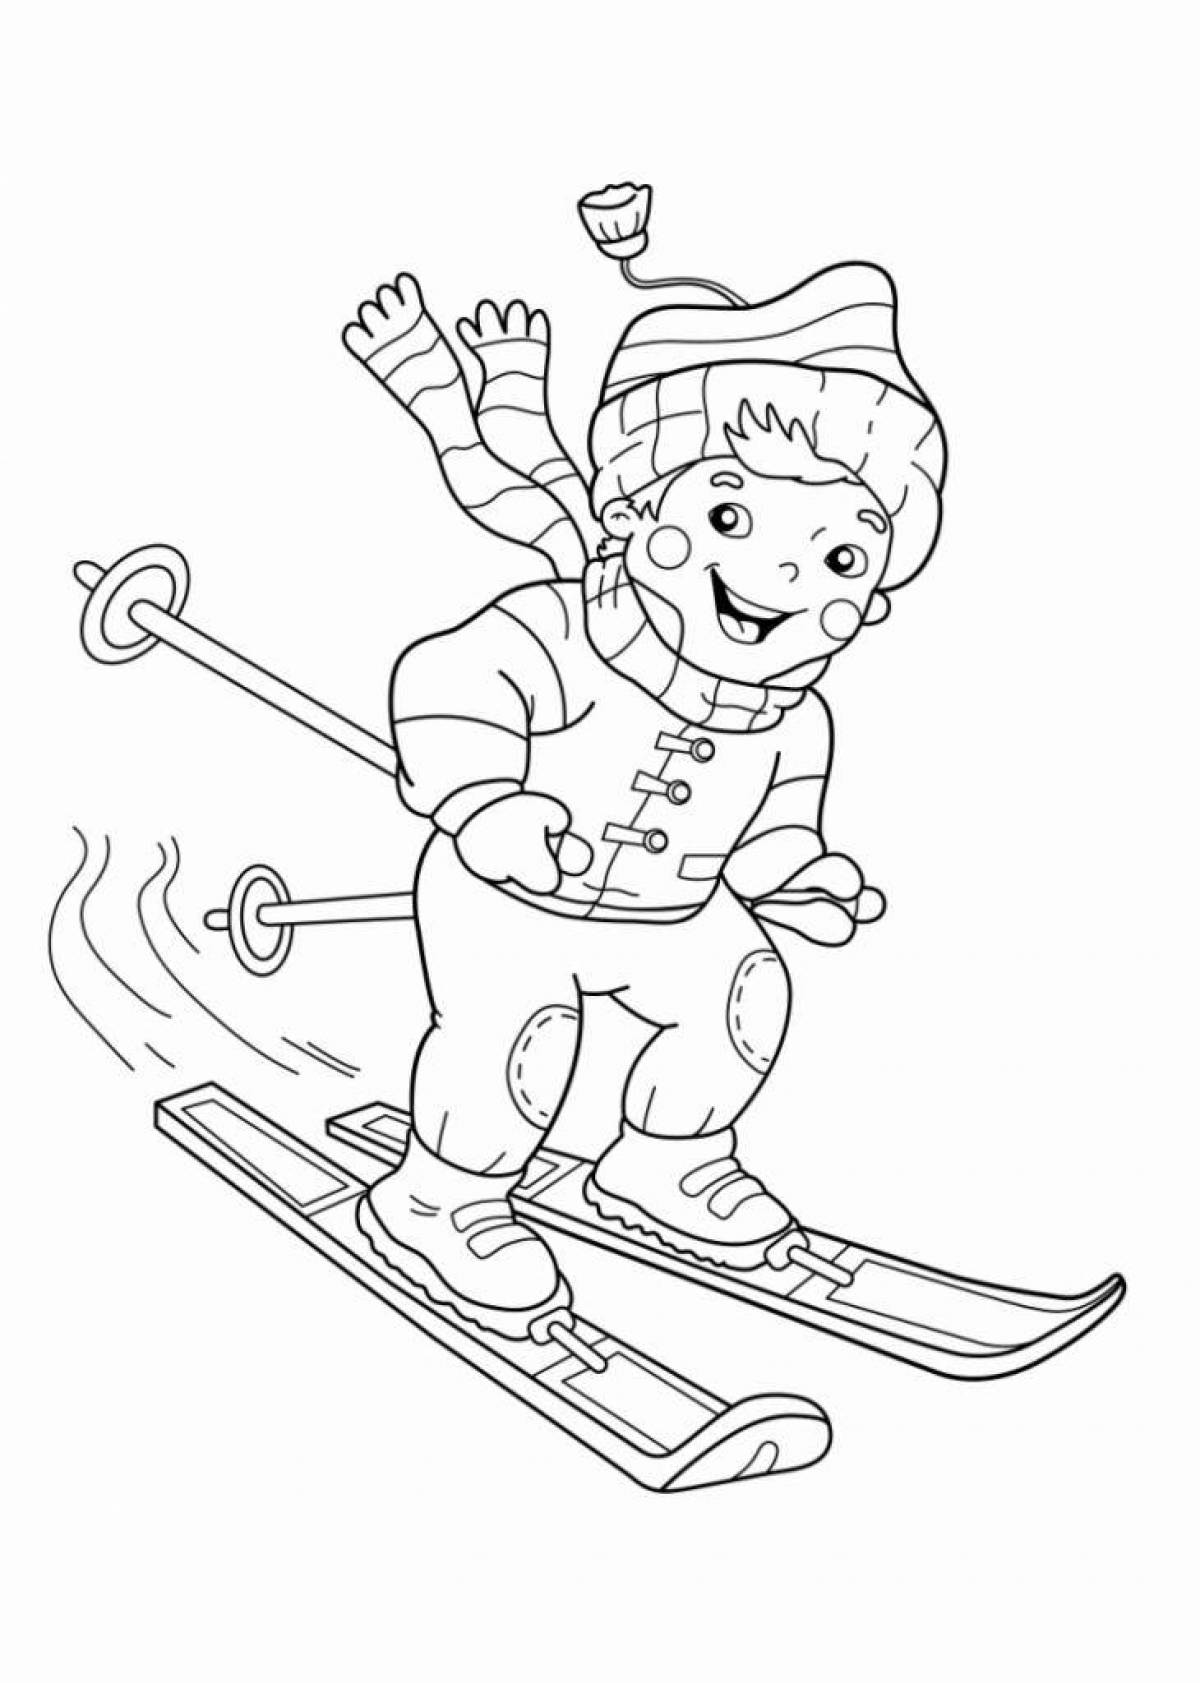 Courageous child on skis coloring page